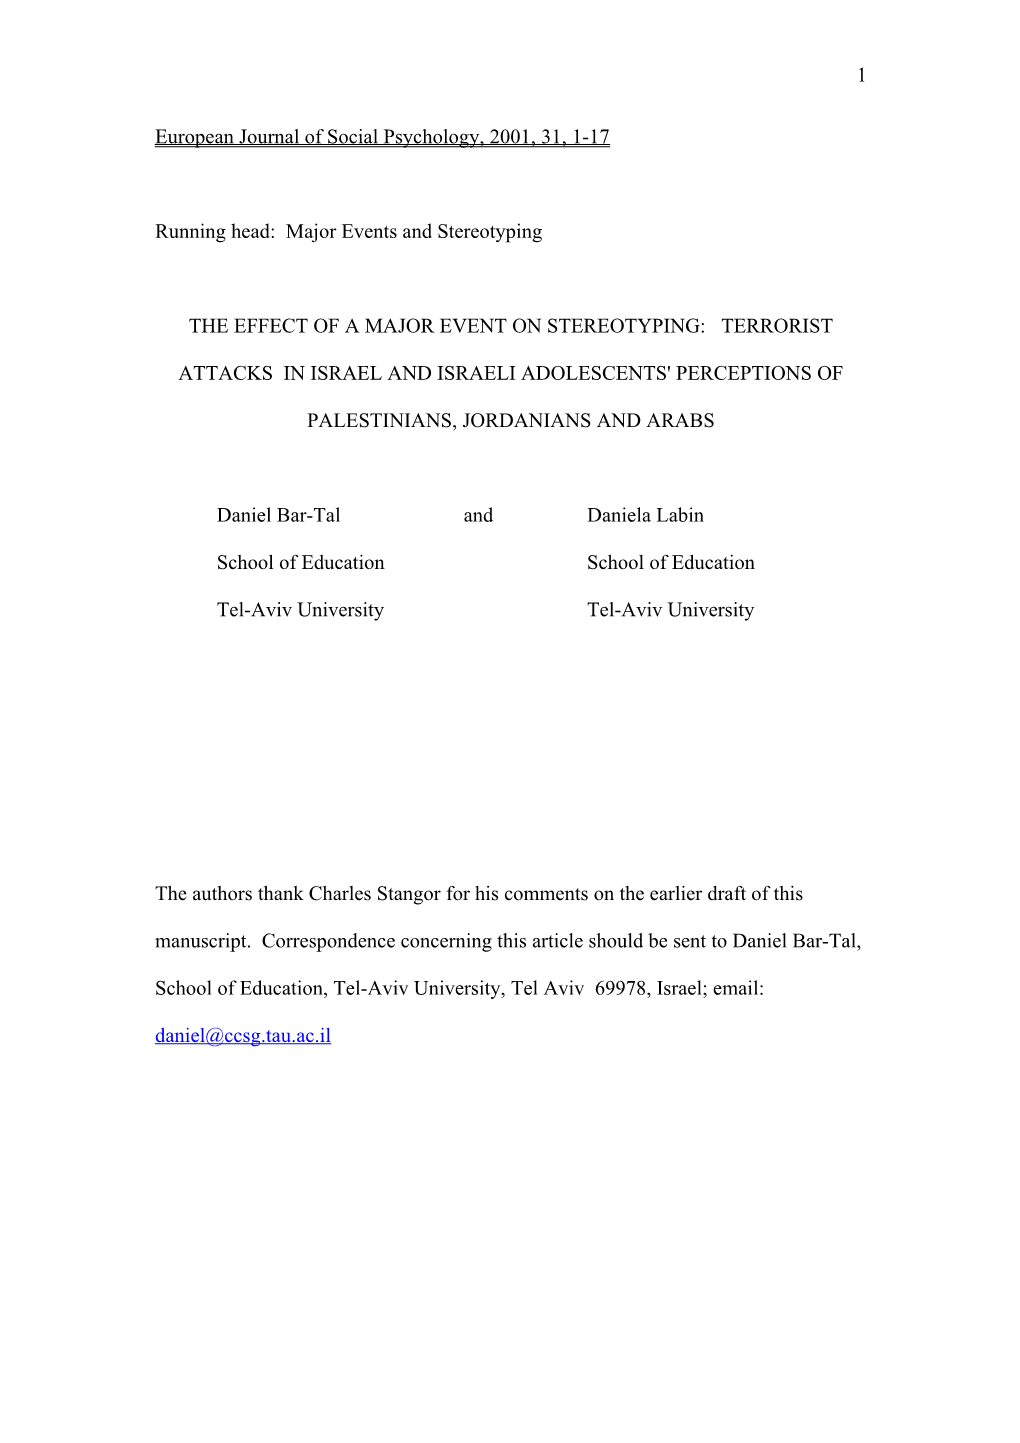 The Effect of a Major Event on Stereotyping: the Case of Terroristic Attack in Israel And